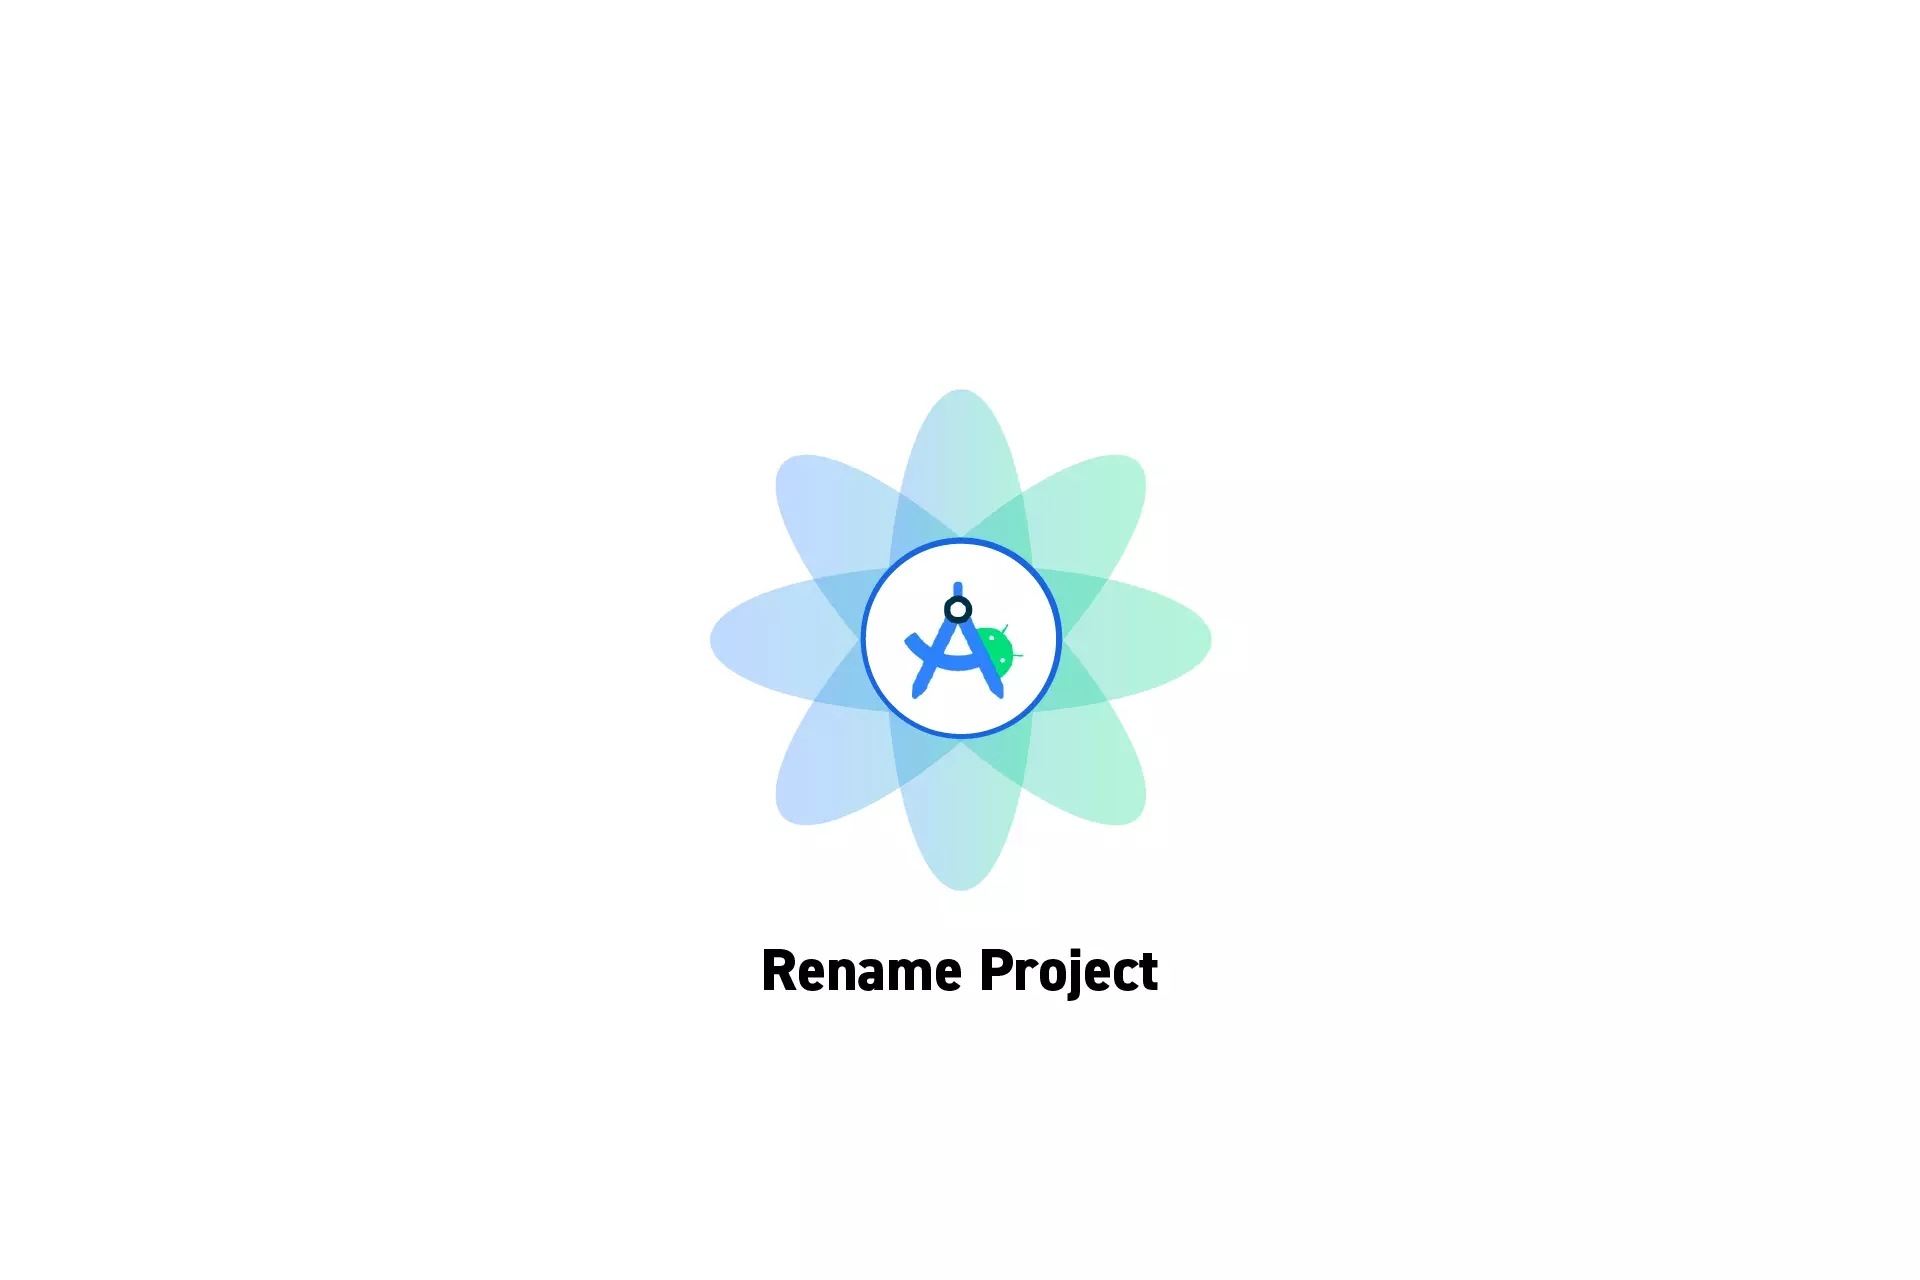 A flower that represents Android Studio with the text “Rename Project” beneath it.